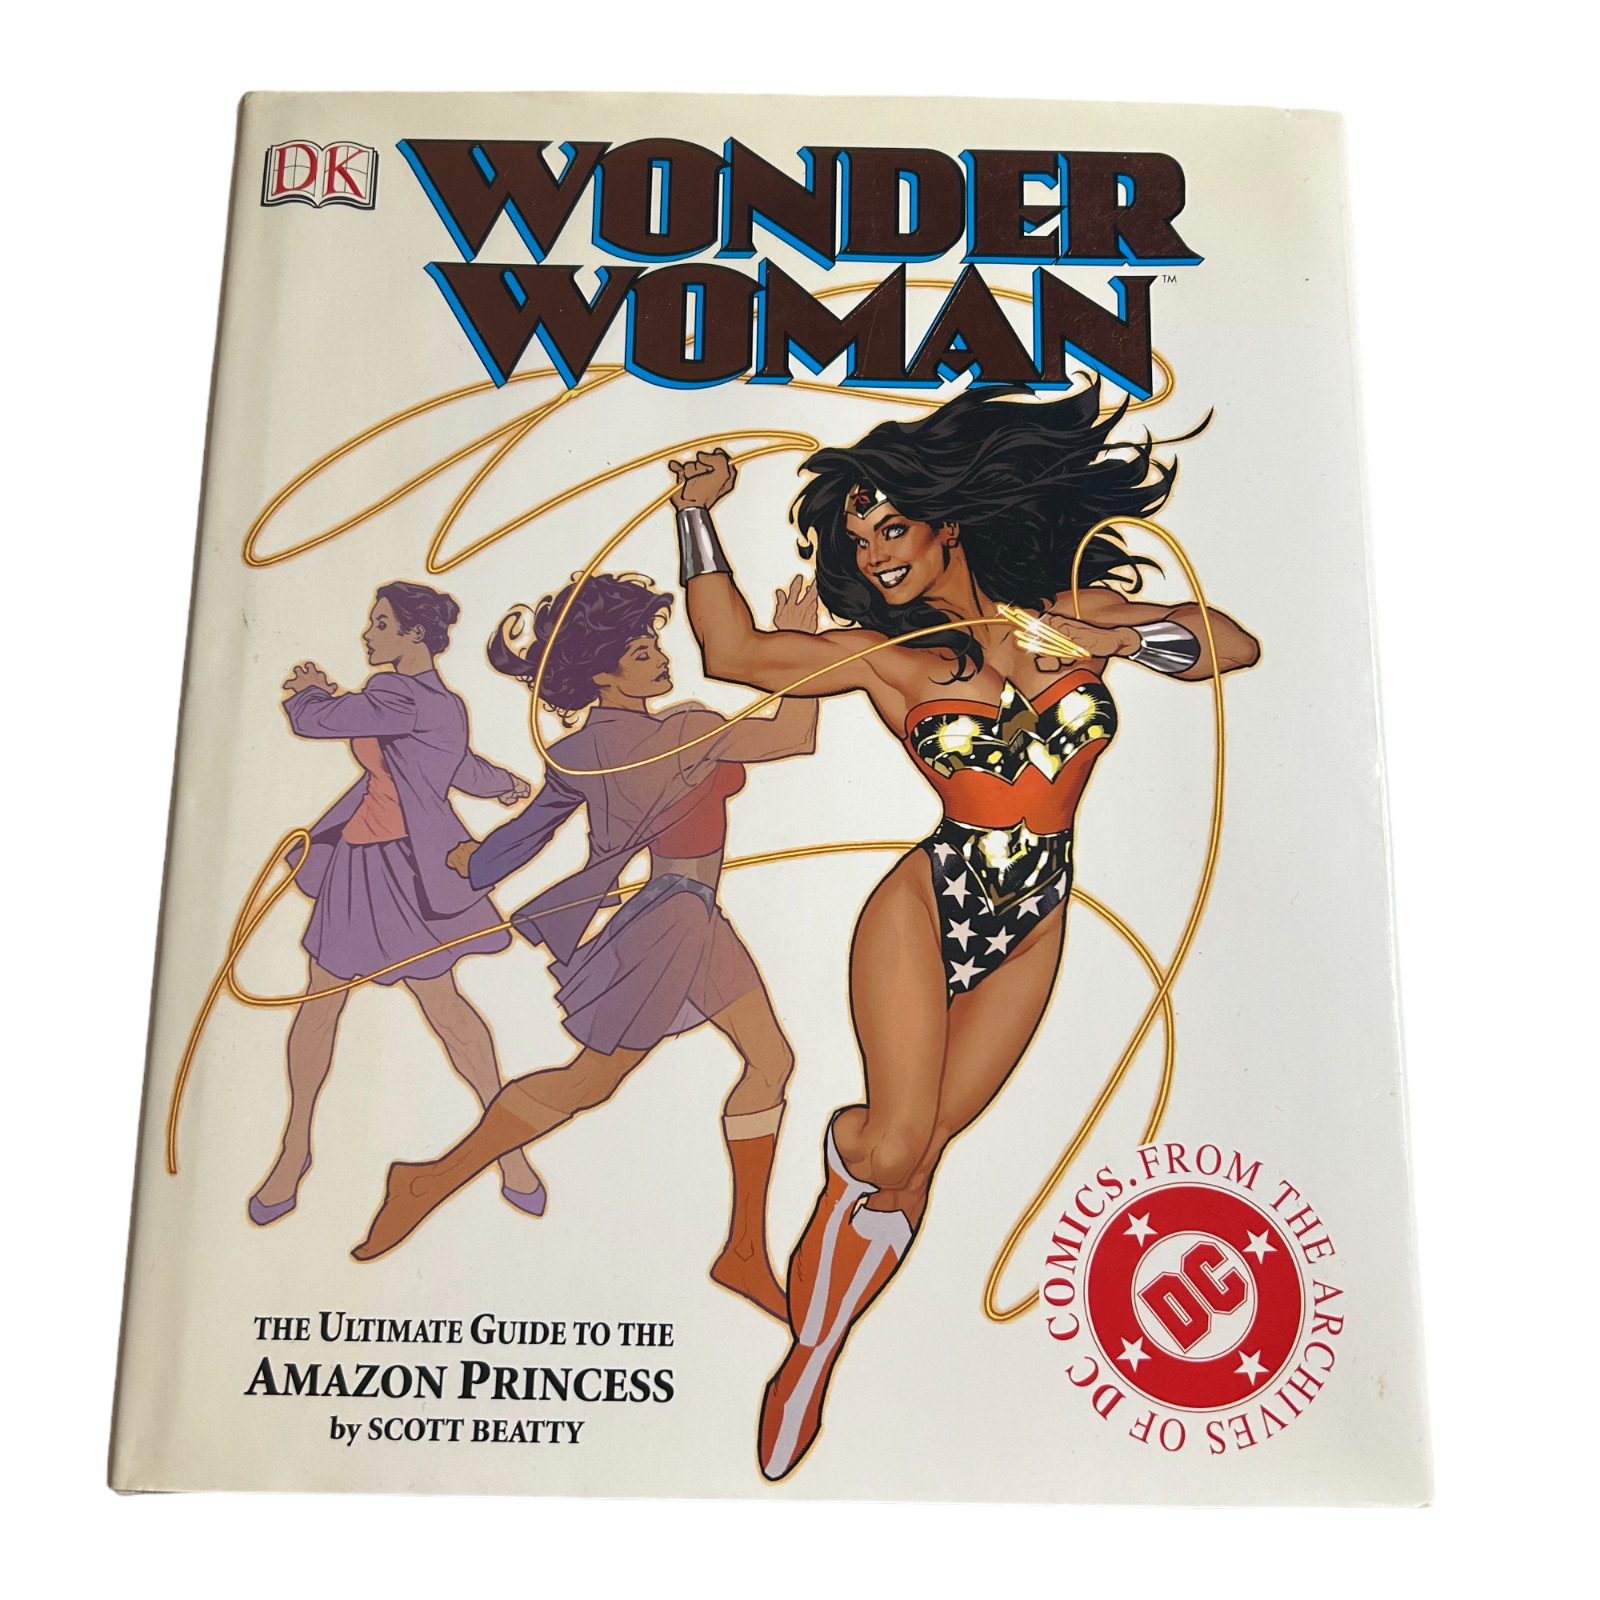 DK Wonder Woman / The Ultimate Guide to the Amazon Princess DC Comic